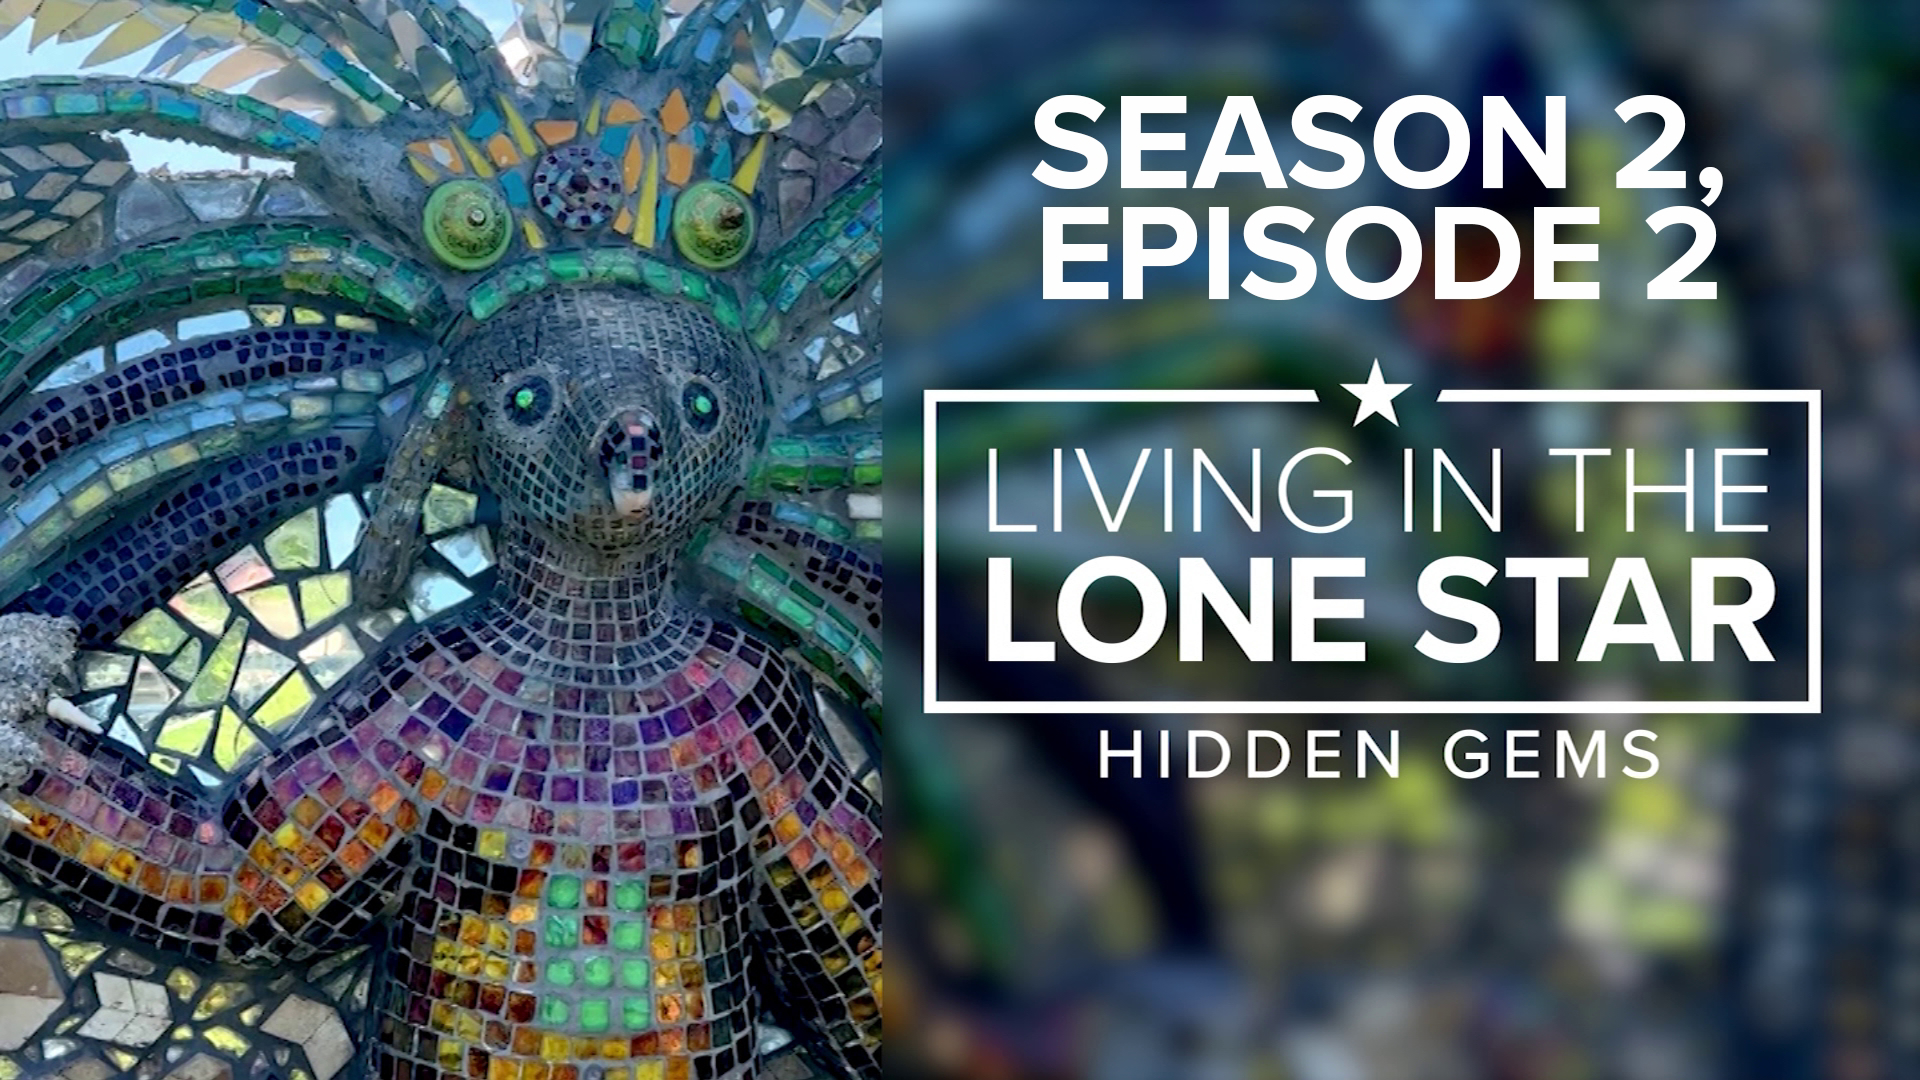 Visit a vintage barn, meet Houston’s hat guy, unwind in the woods and place your order at a cocktail laboratory in this episode of KHOU 11+ Hidden Gems.